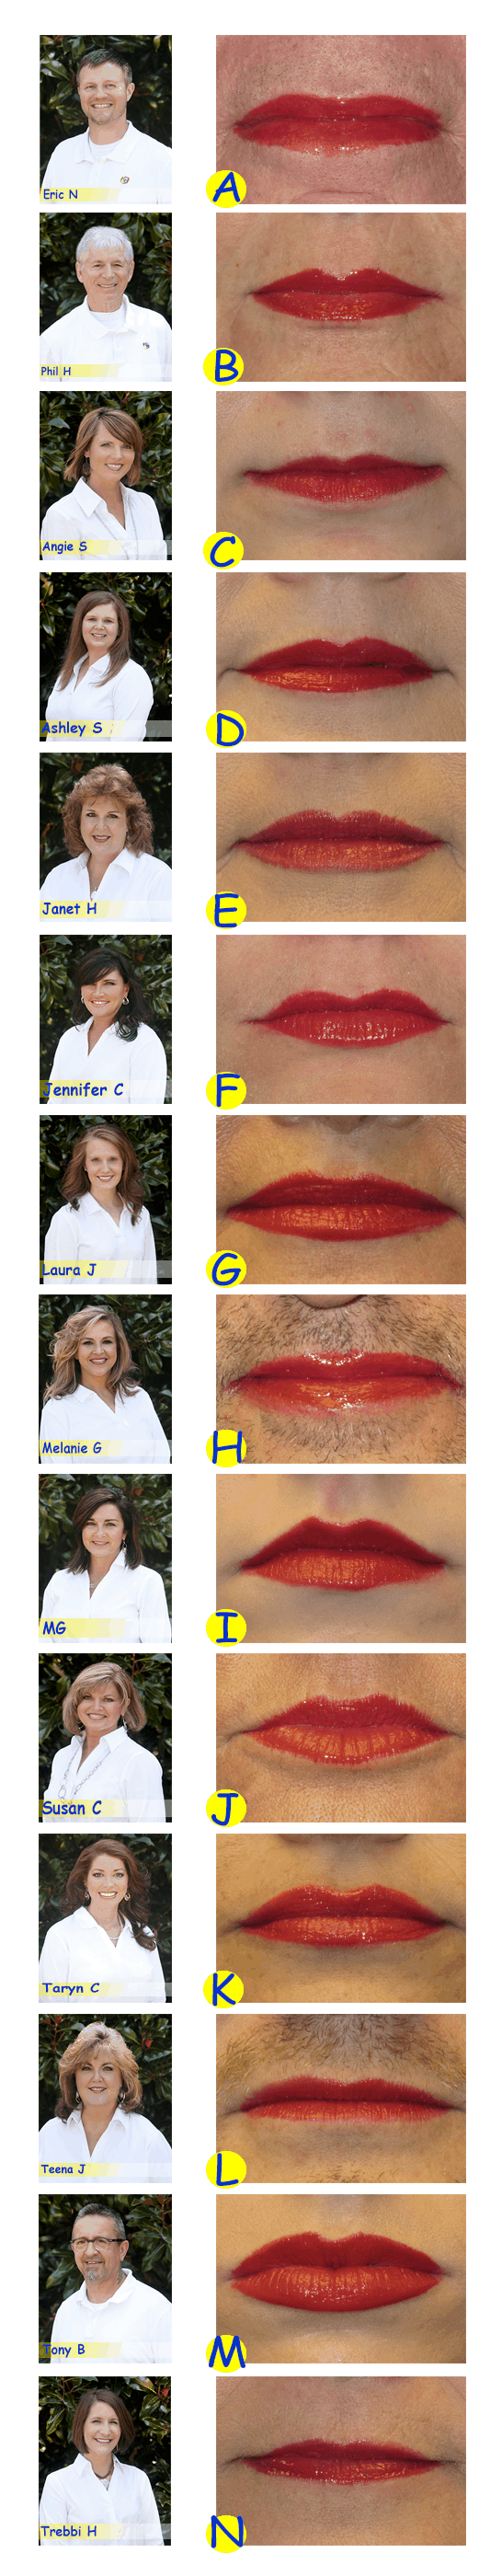 Guess Our Lips Contest - Nease & Higginbotham Orthodontics